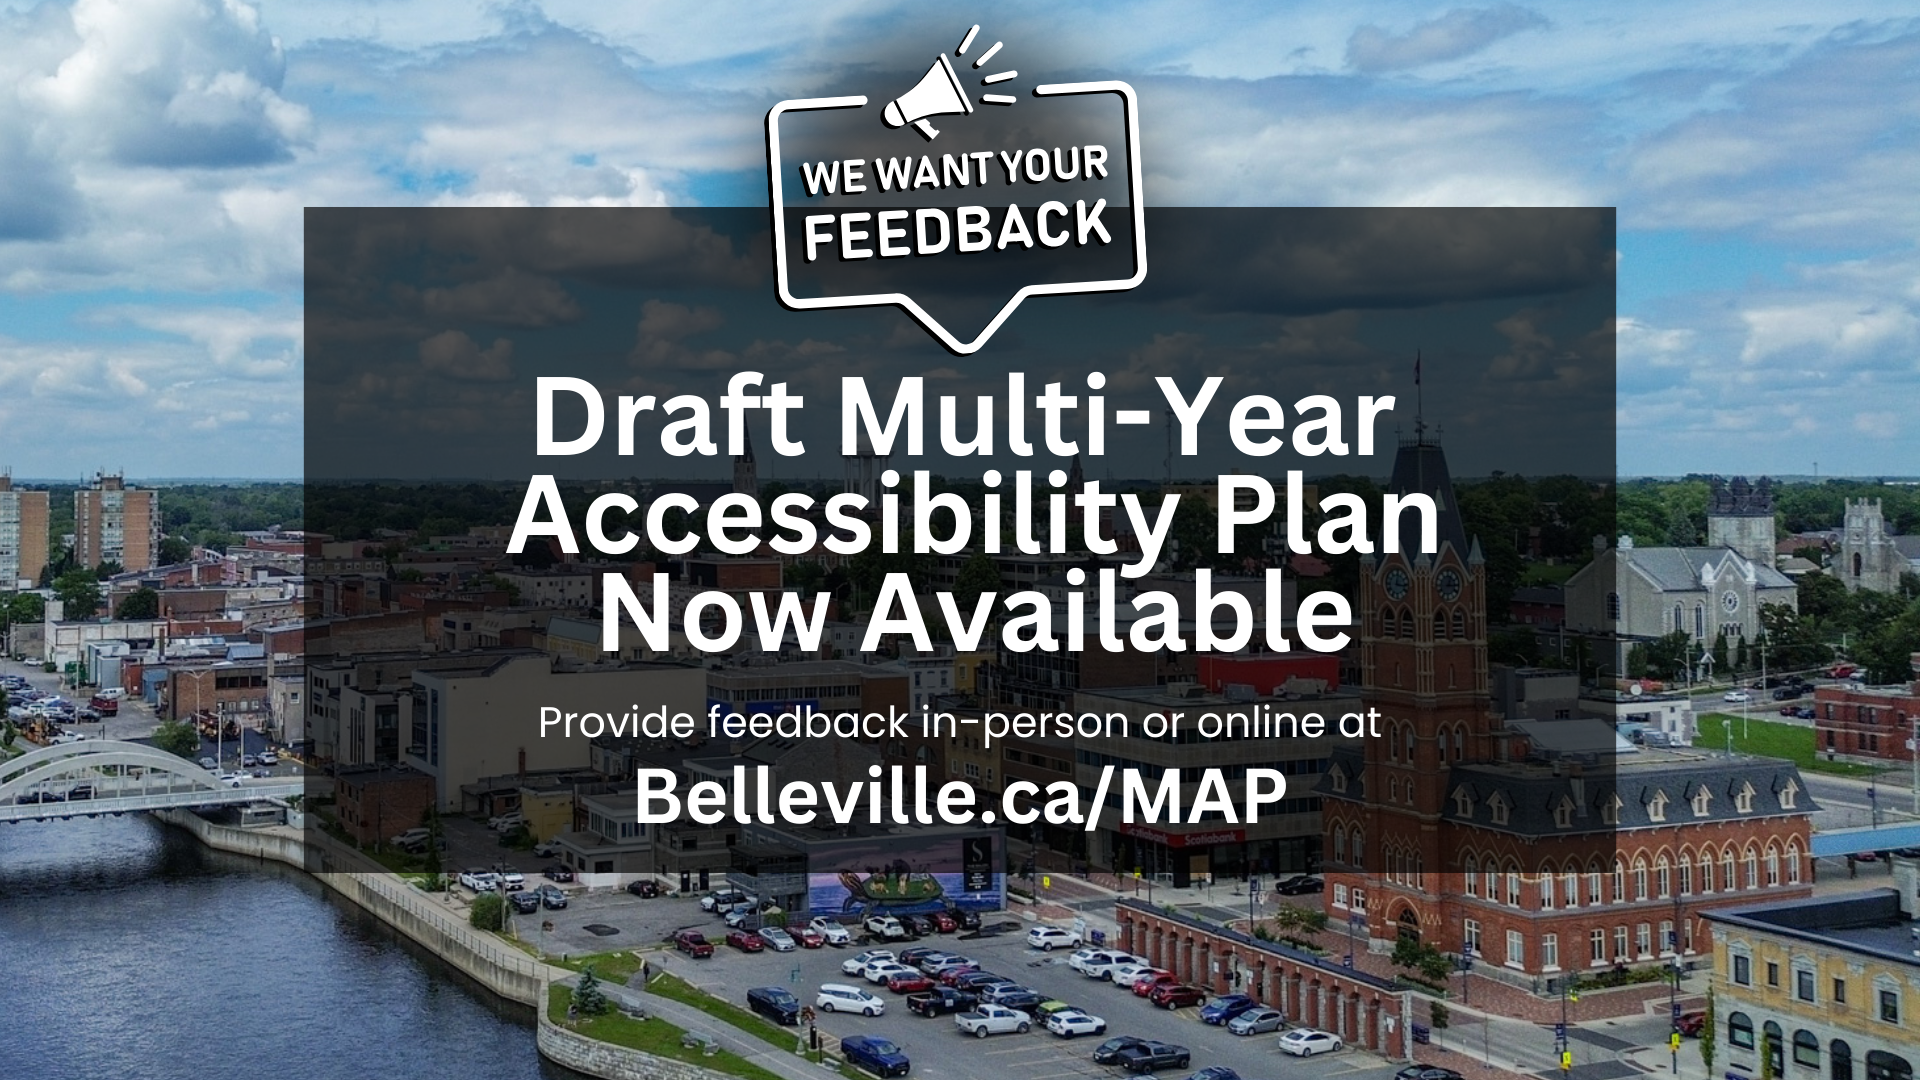 A Graphic for the Draft Feedback on Multi-Year Accessibility Plan now being available and asking for feedback from the community.